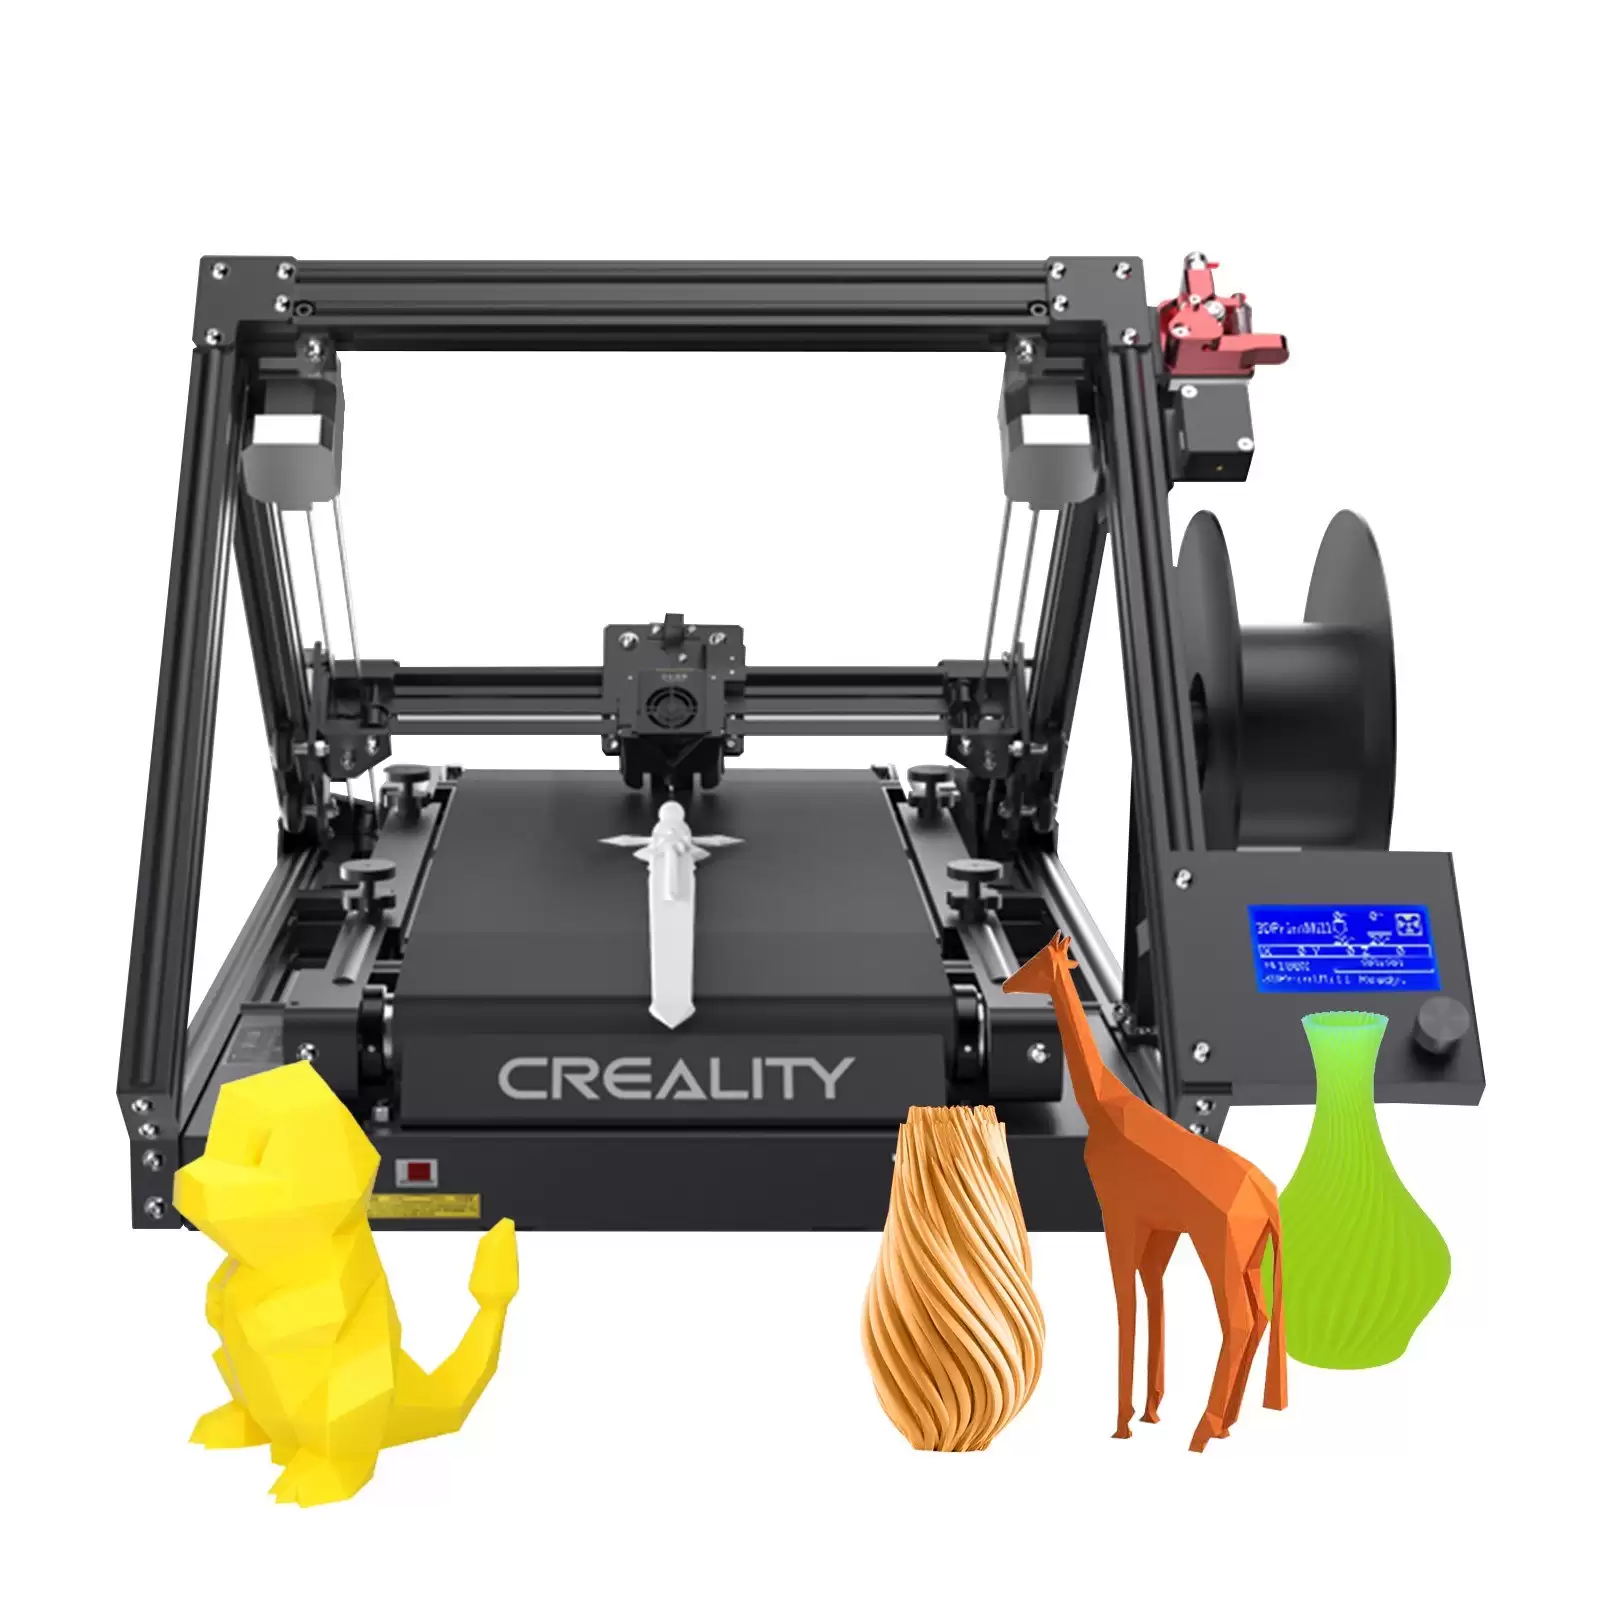 Order In Just $949 Creality Cr-30 3dprintmill 3d Printer With This Coupon Code